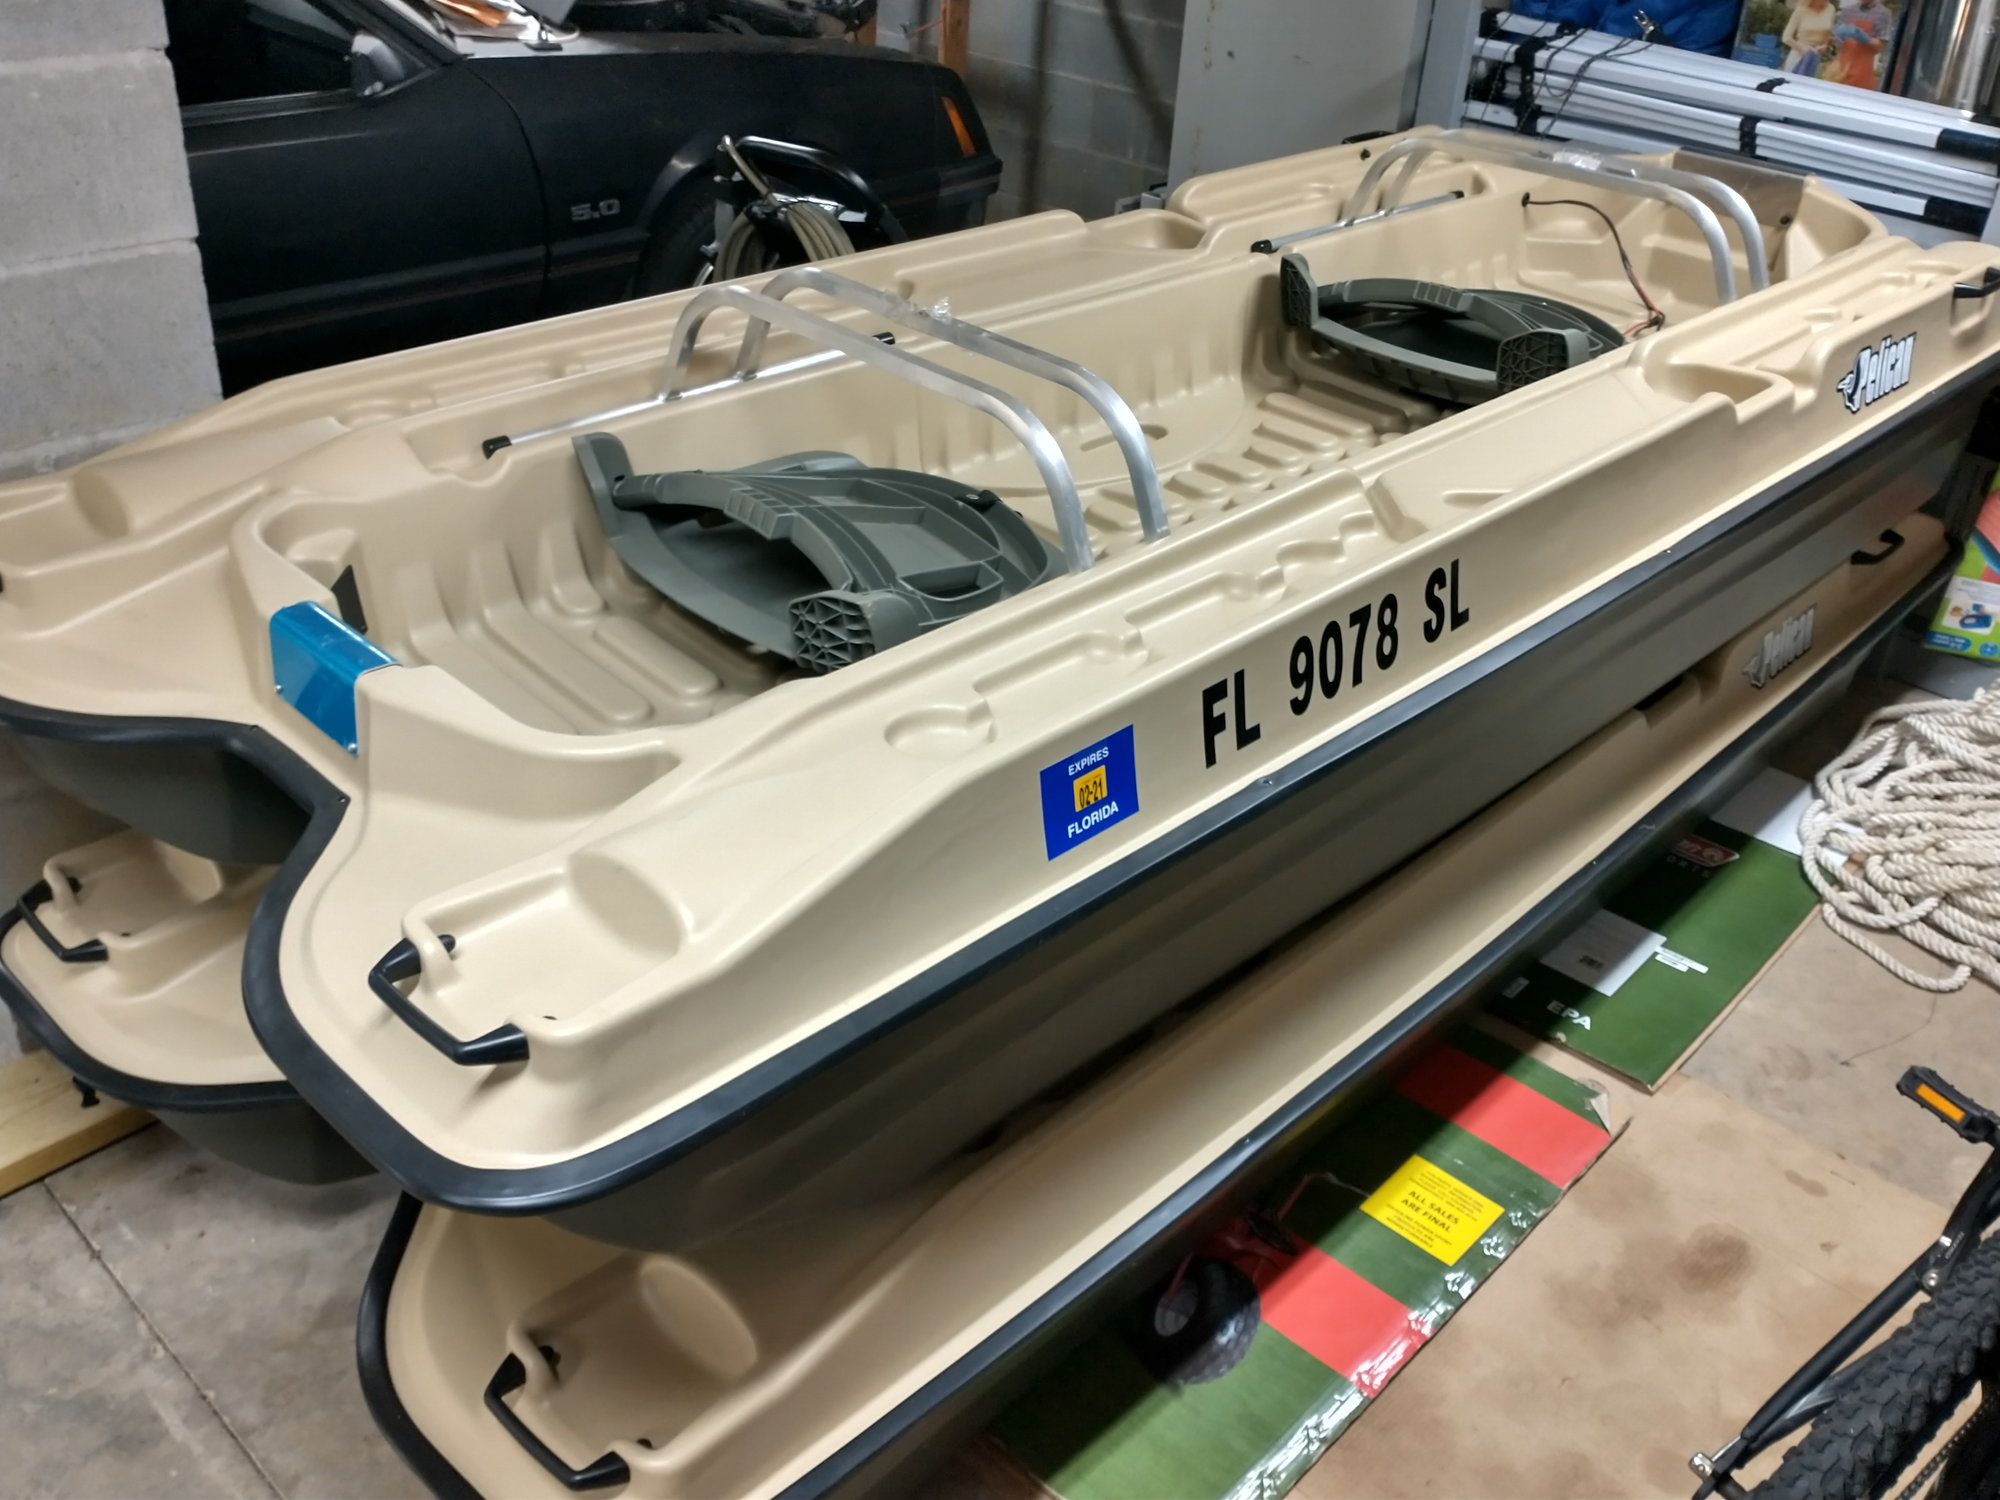 Pelican Boat Boats for sale